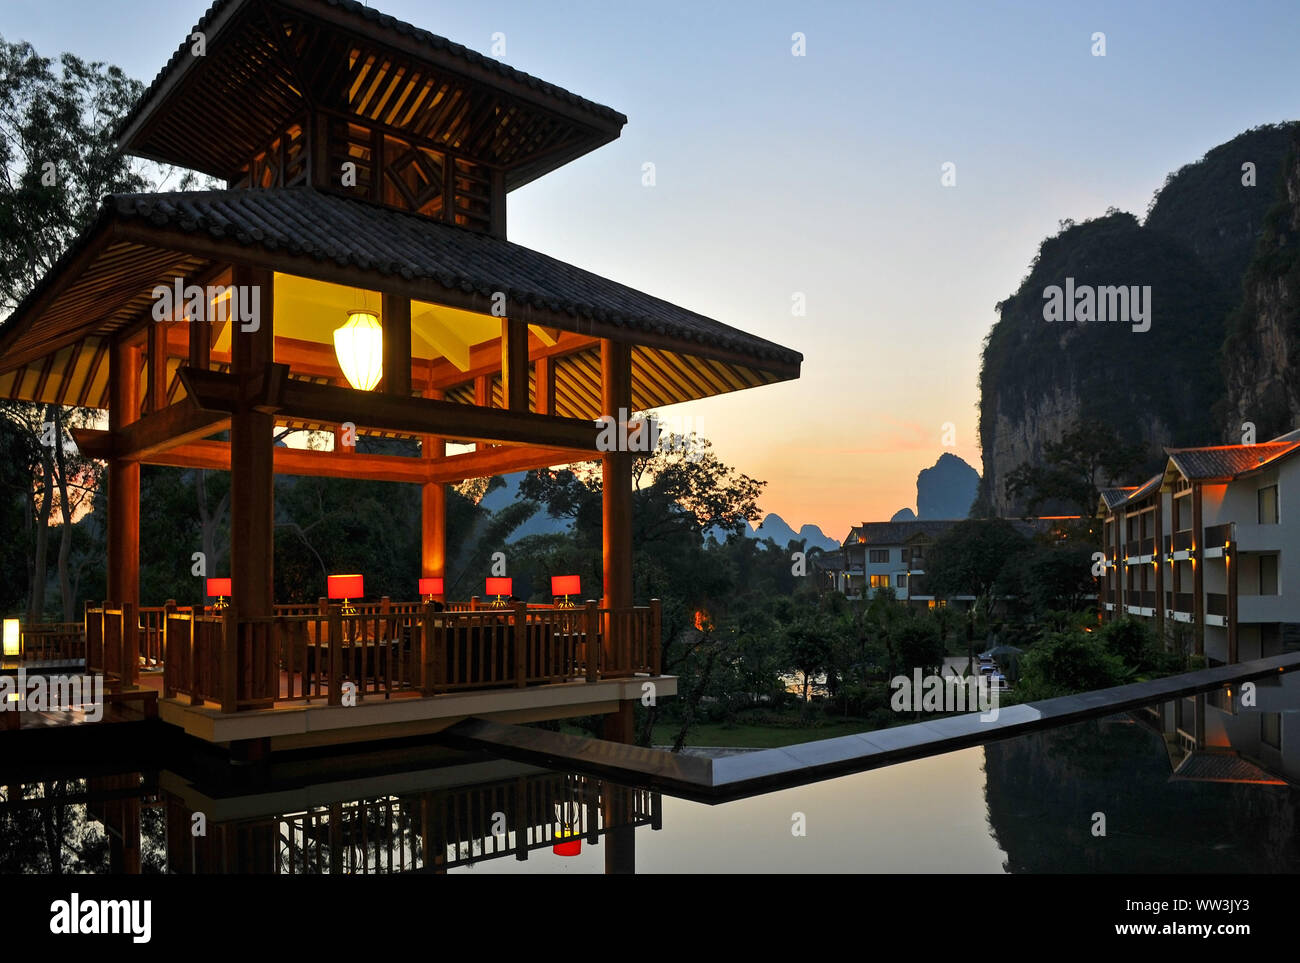 The karst geologic rock formations and chinese architecture in Yangshuo at sunset, Guangxi province, China. Stock Photo